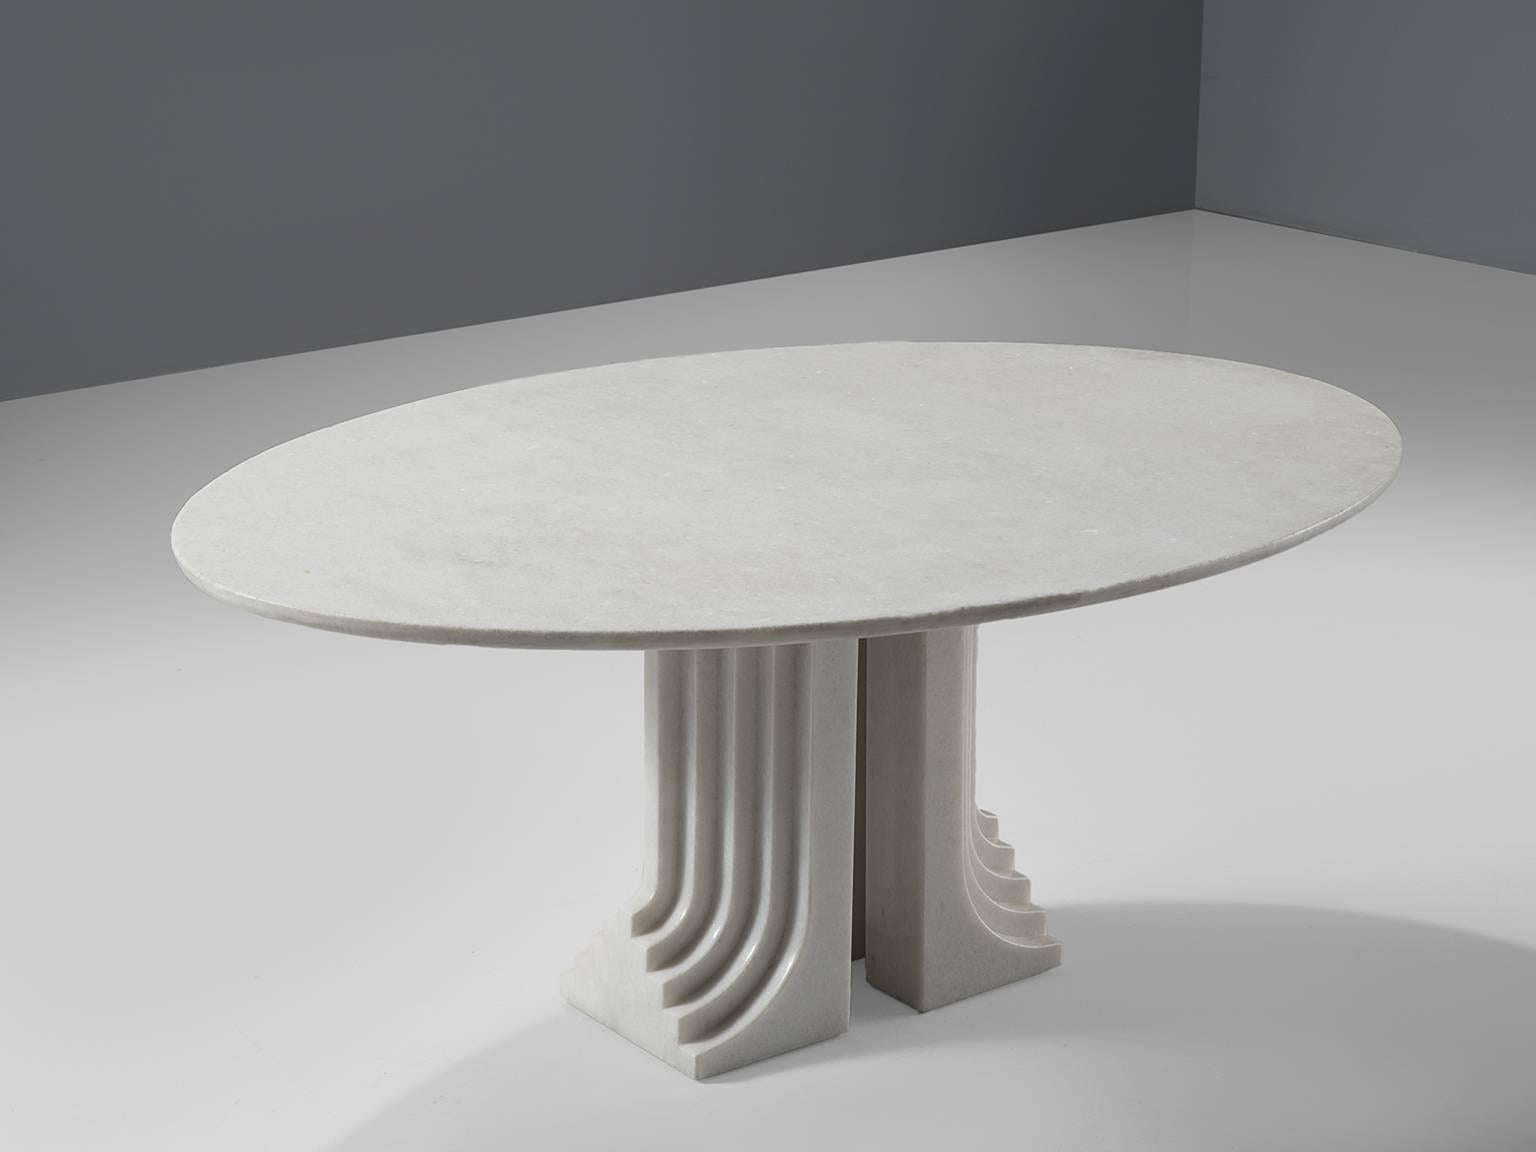 Carlo Scarpa for Simon, marble, Italy, 1970s

This 'Samo' table is part of the 'Ultrarazionale' collection by Simon. The base of the table is formed out of two layered pillars that seem exist of several pillars in a row, clearly a reference to the